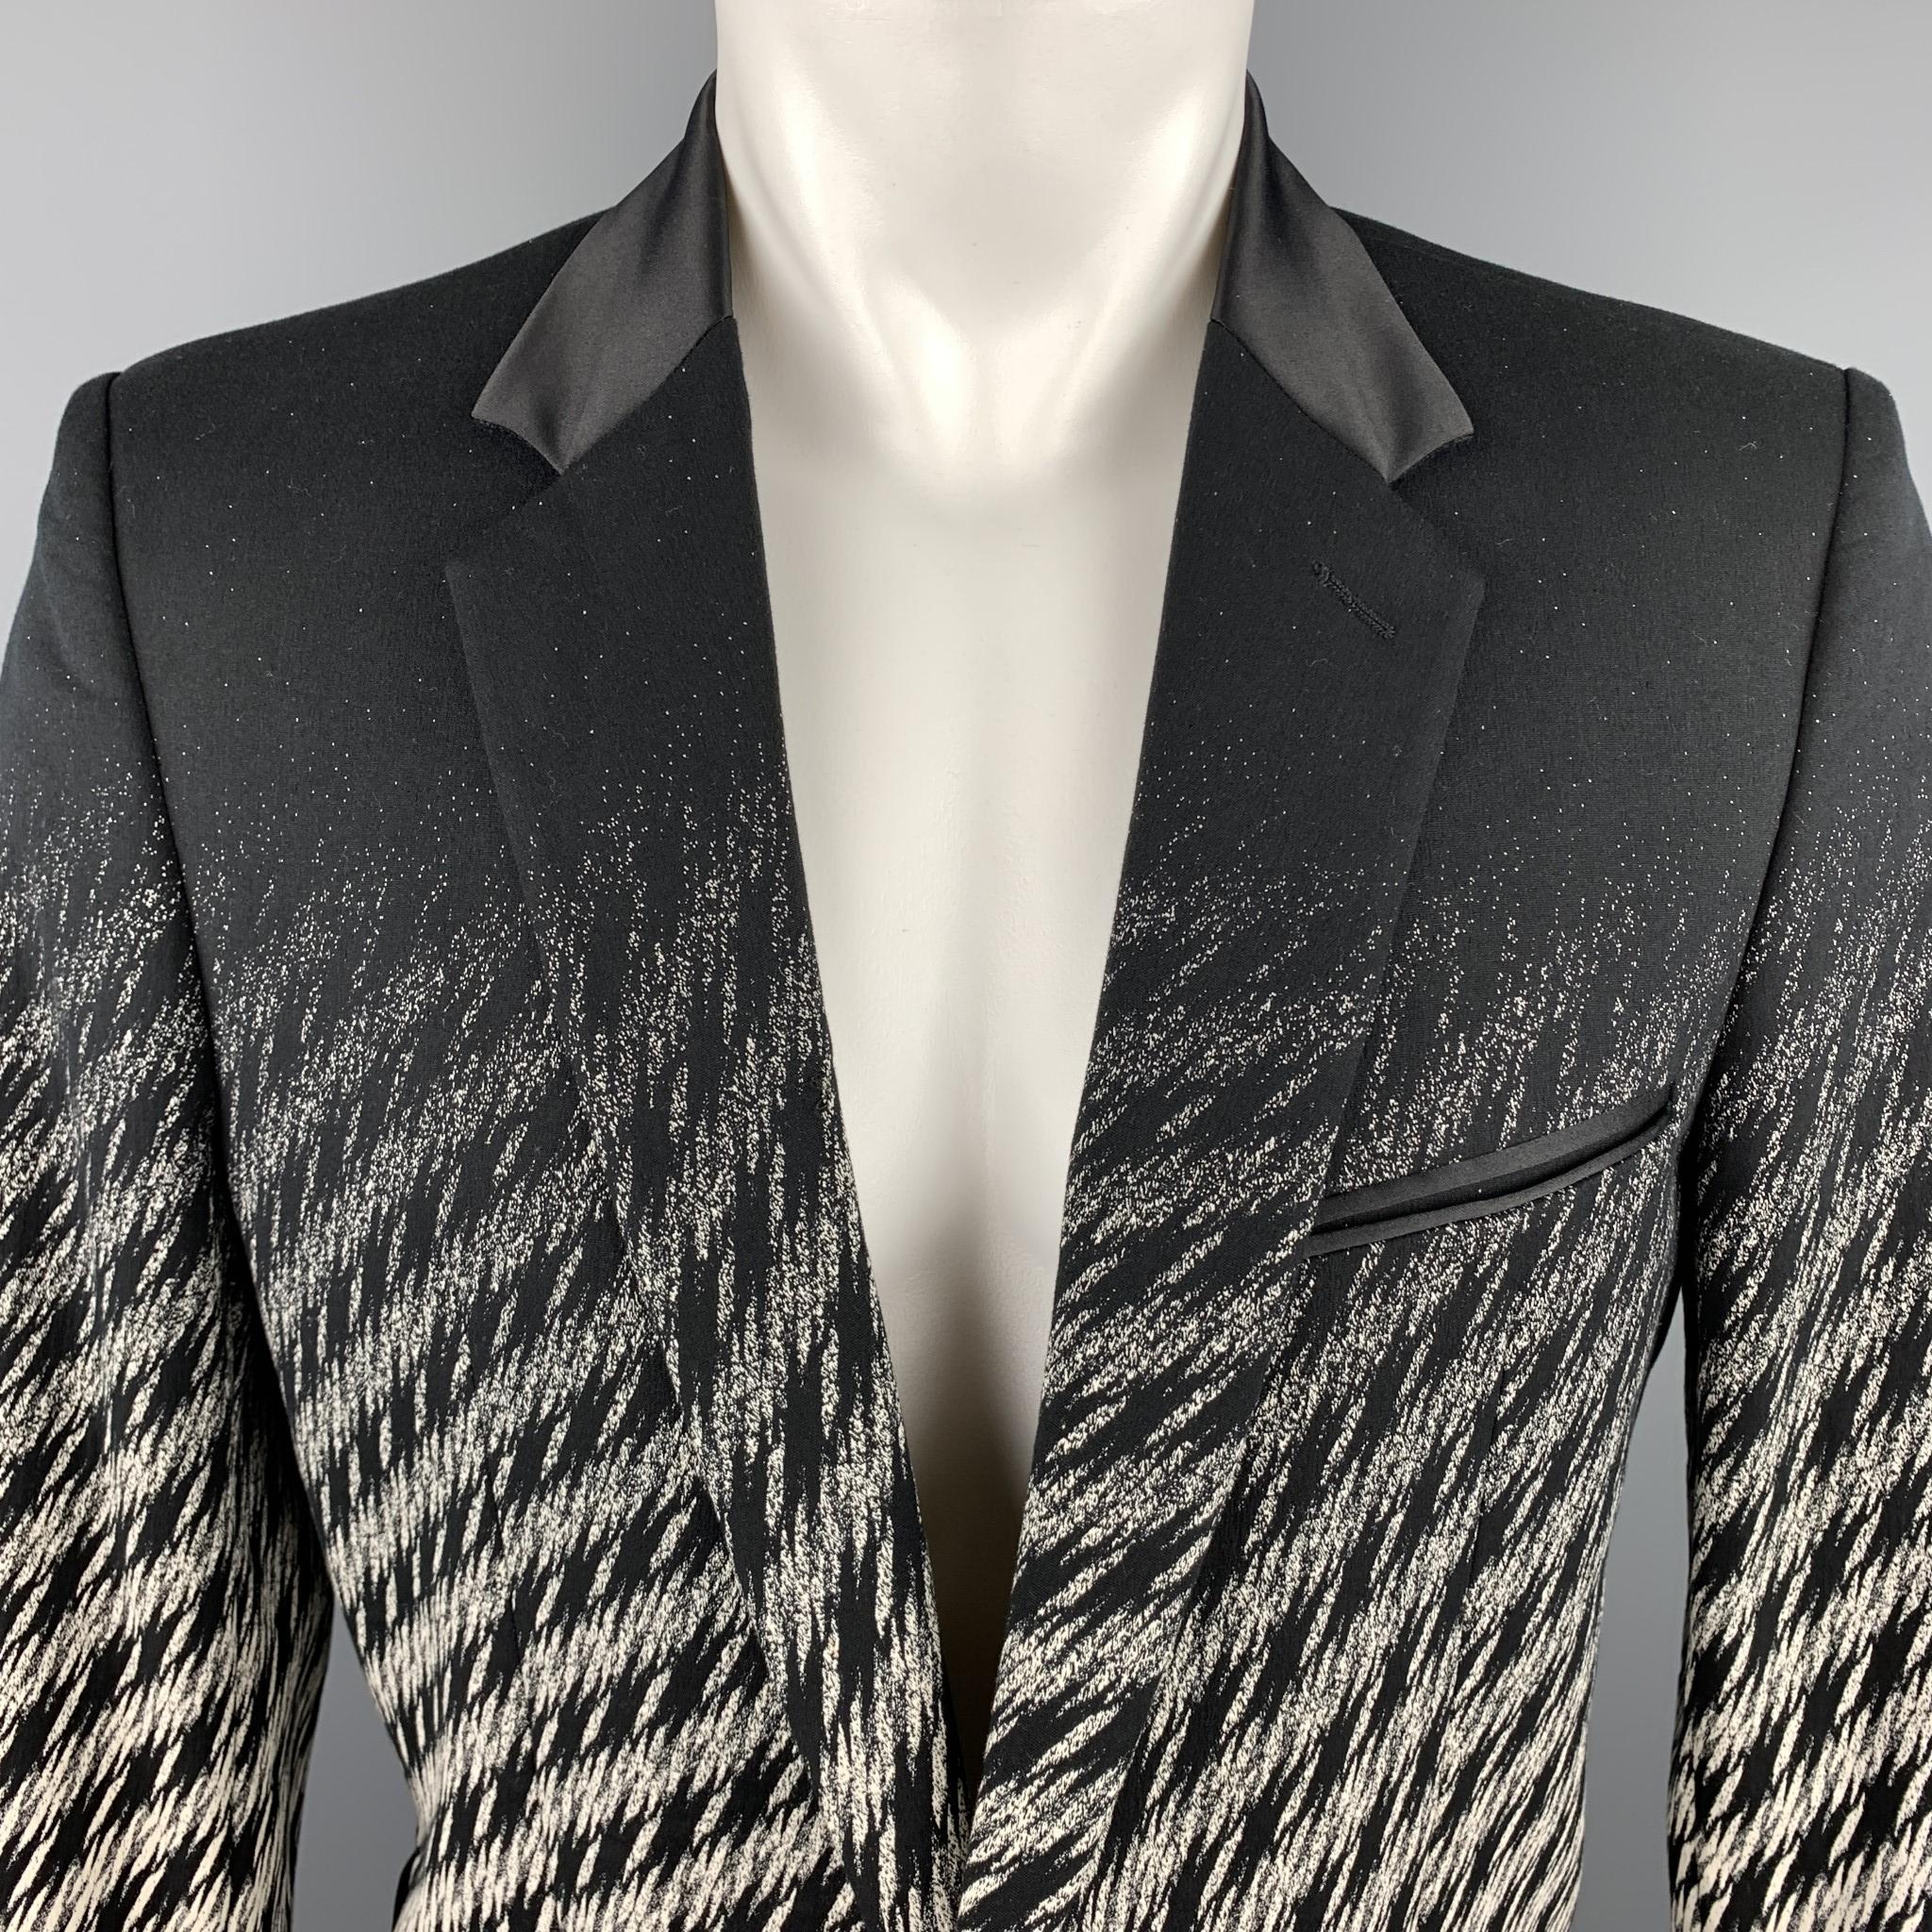 JUST CAVALLI sport coat comes in woven cotton blend with a notch lapel, single breasted, two button front, andr black and white ombre effect houndstooth print. Made in Italy.

Excellent Pre-Owned Condition.
Marked: IT 52

Measurements:

Shoulder: